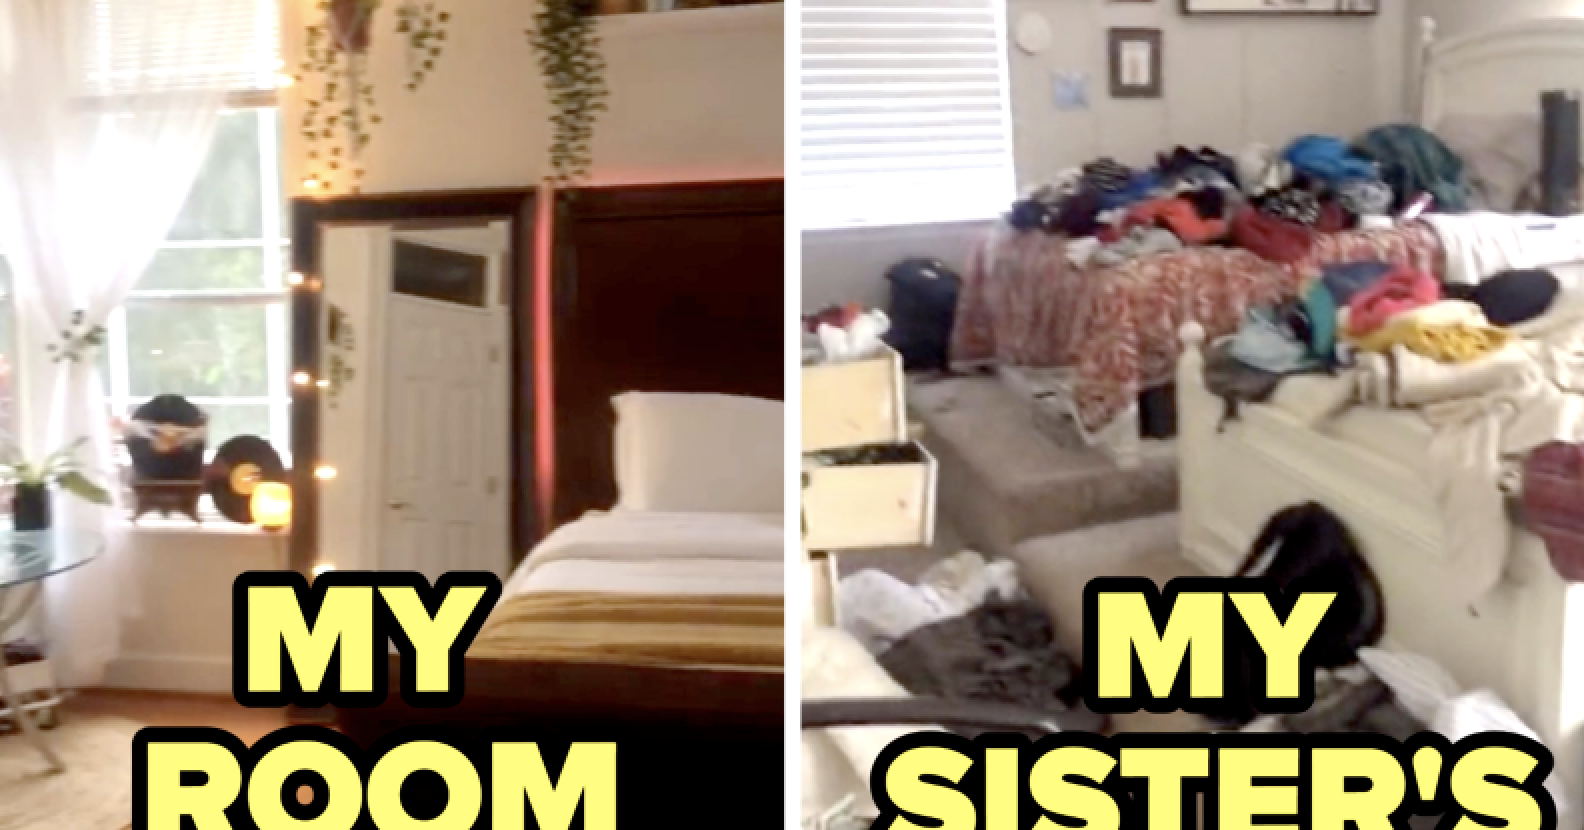 This Neat Vs. Messy Sister Room Challenge Has Got Me Wide-Eyed